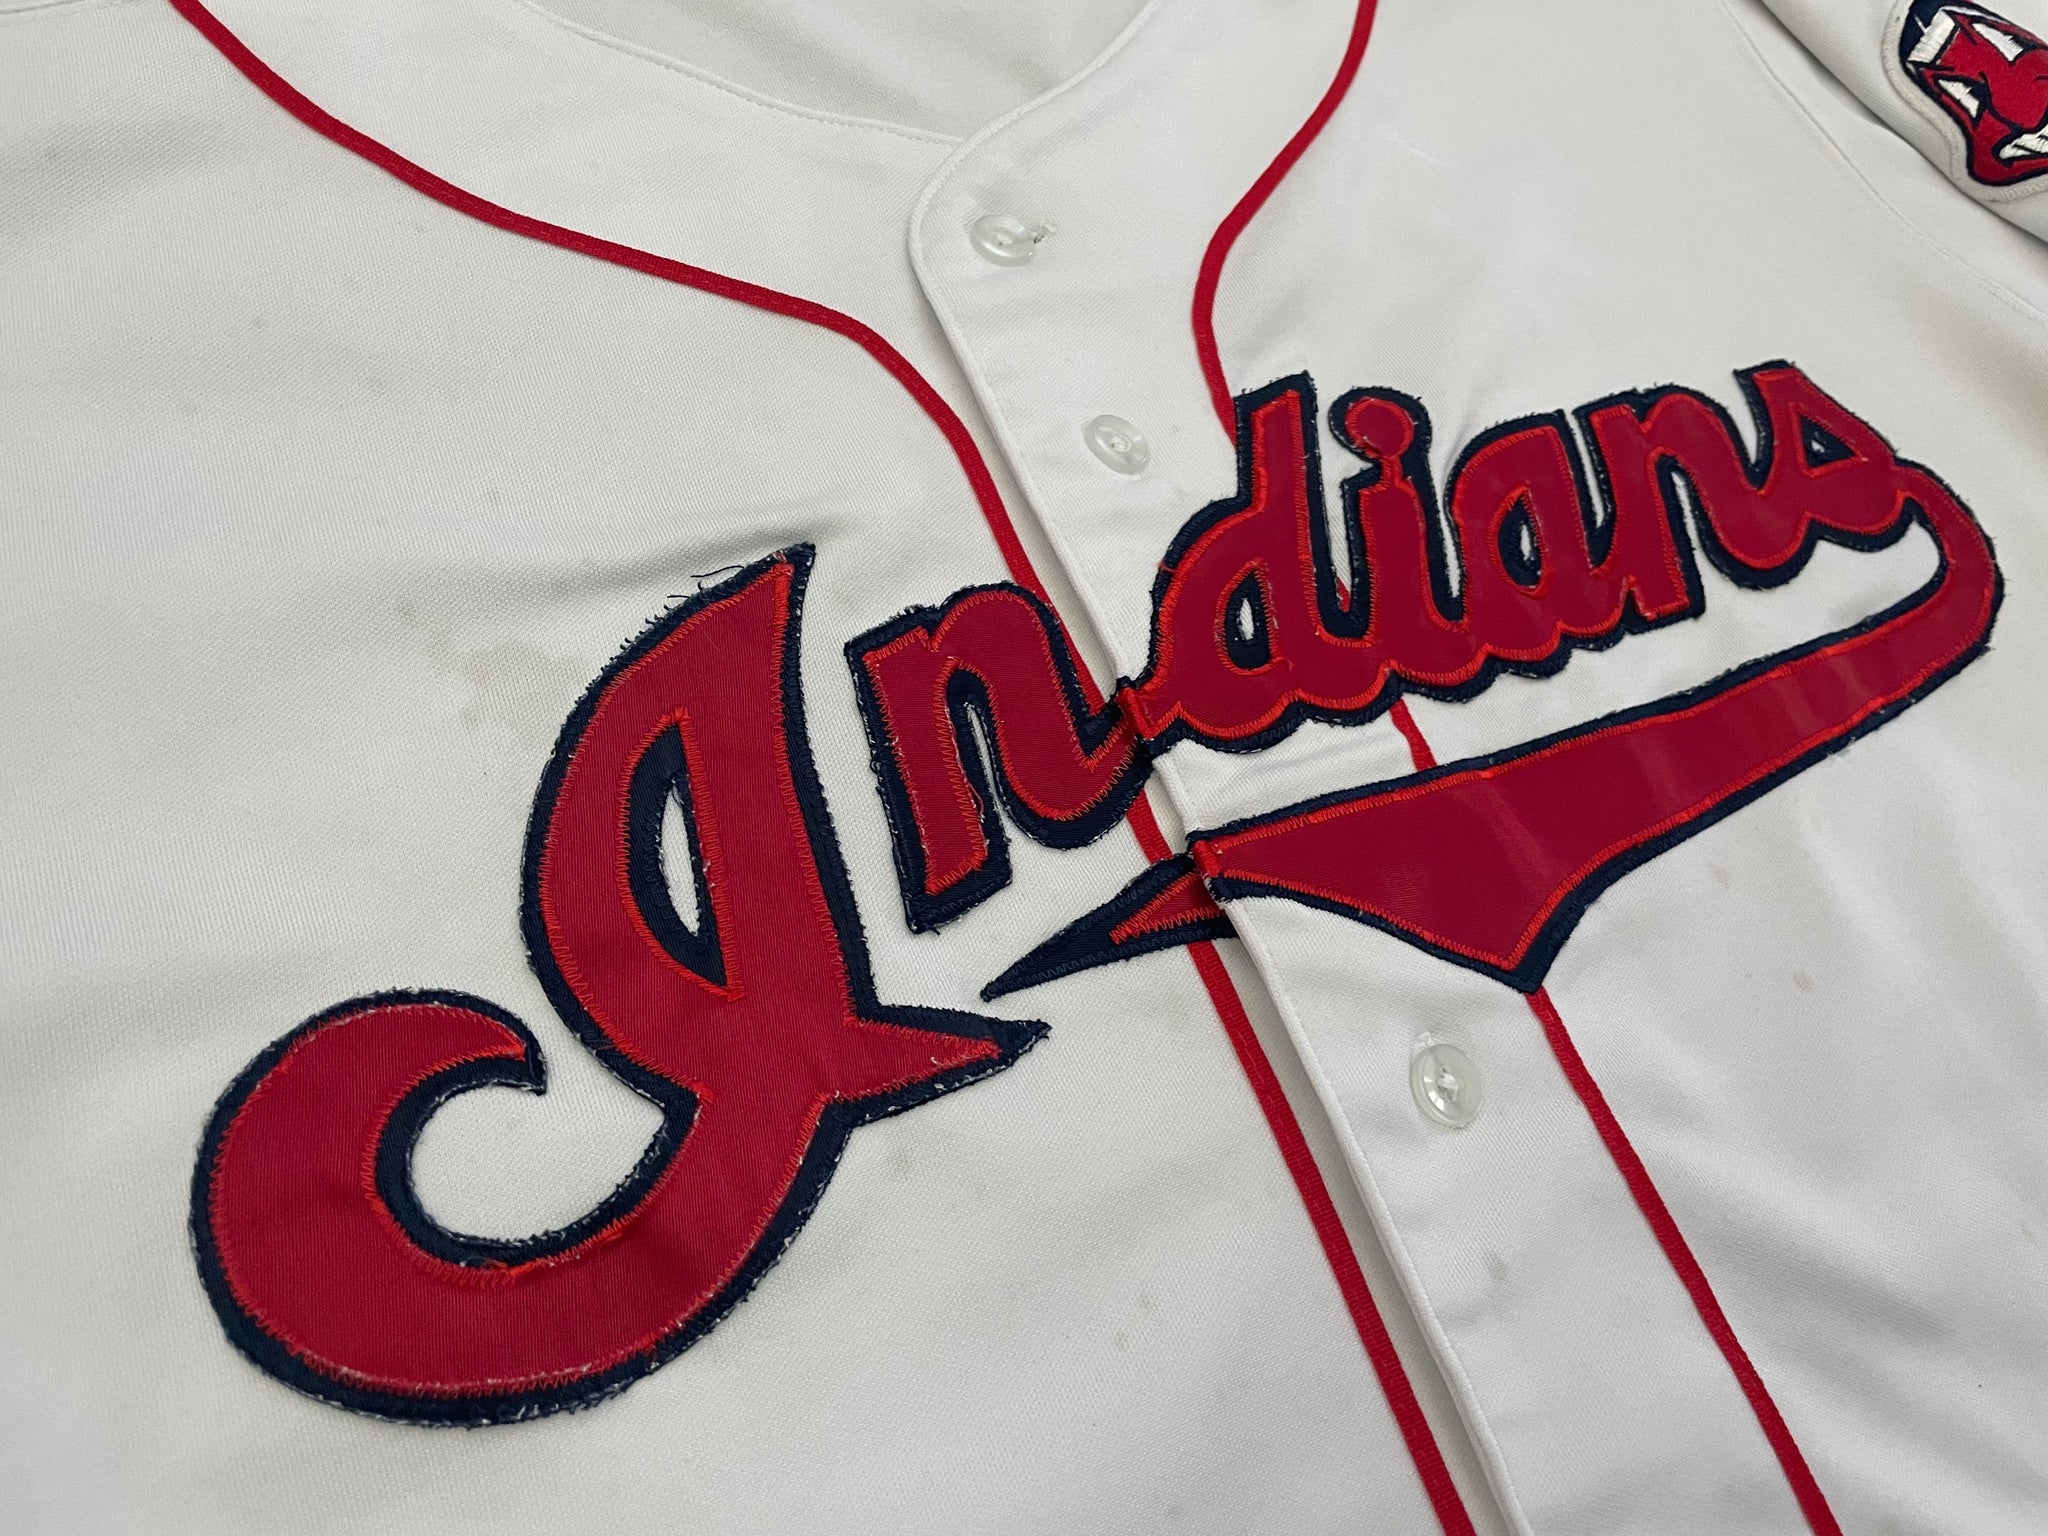 Vintage 80s Cleveland Indians Authentic Rawlings Jersey 40